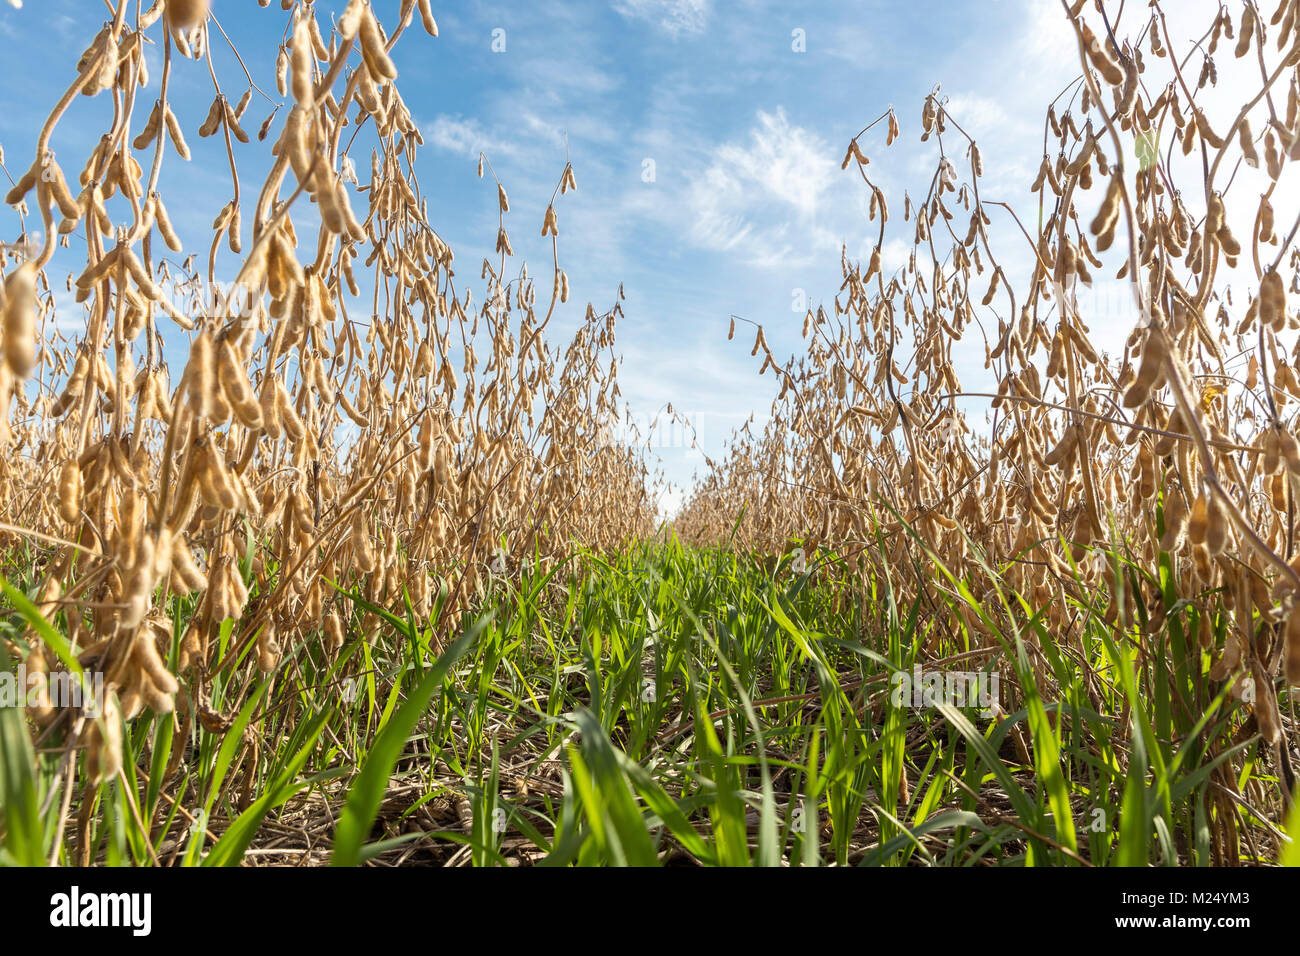 Row of Soybean Plants and Cover Crop, Regenerative Agriculture Stock Photo